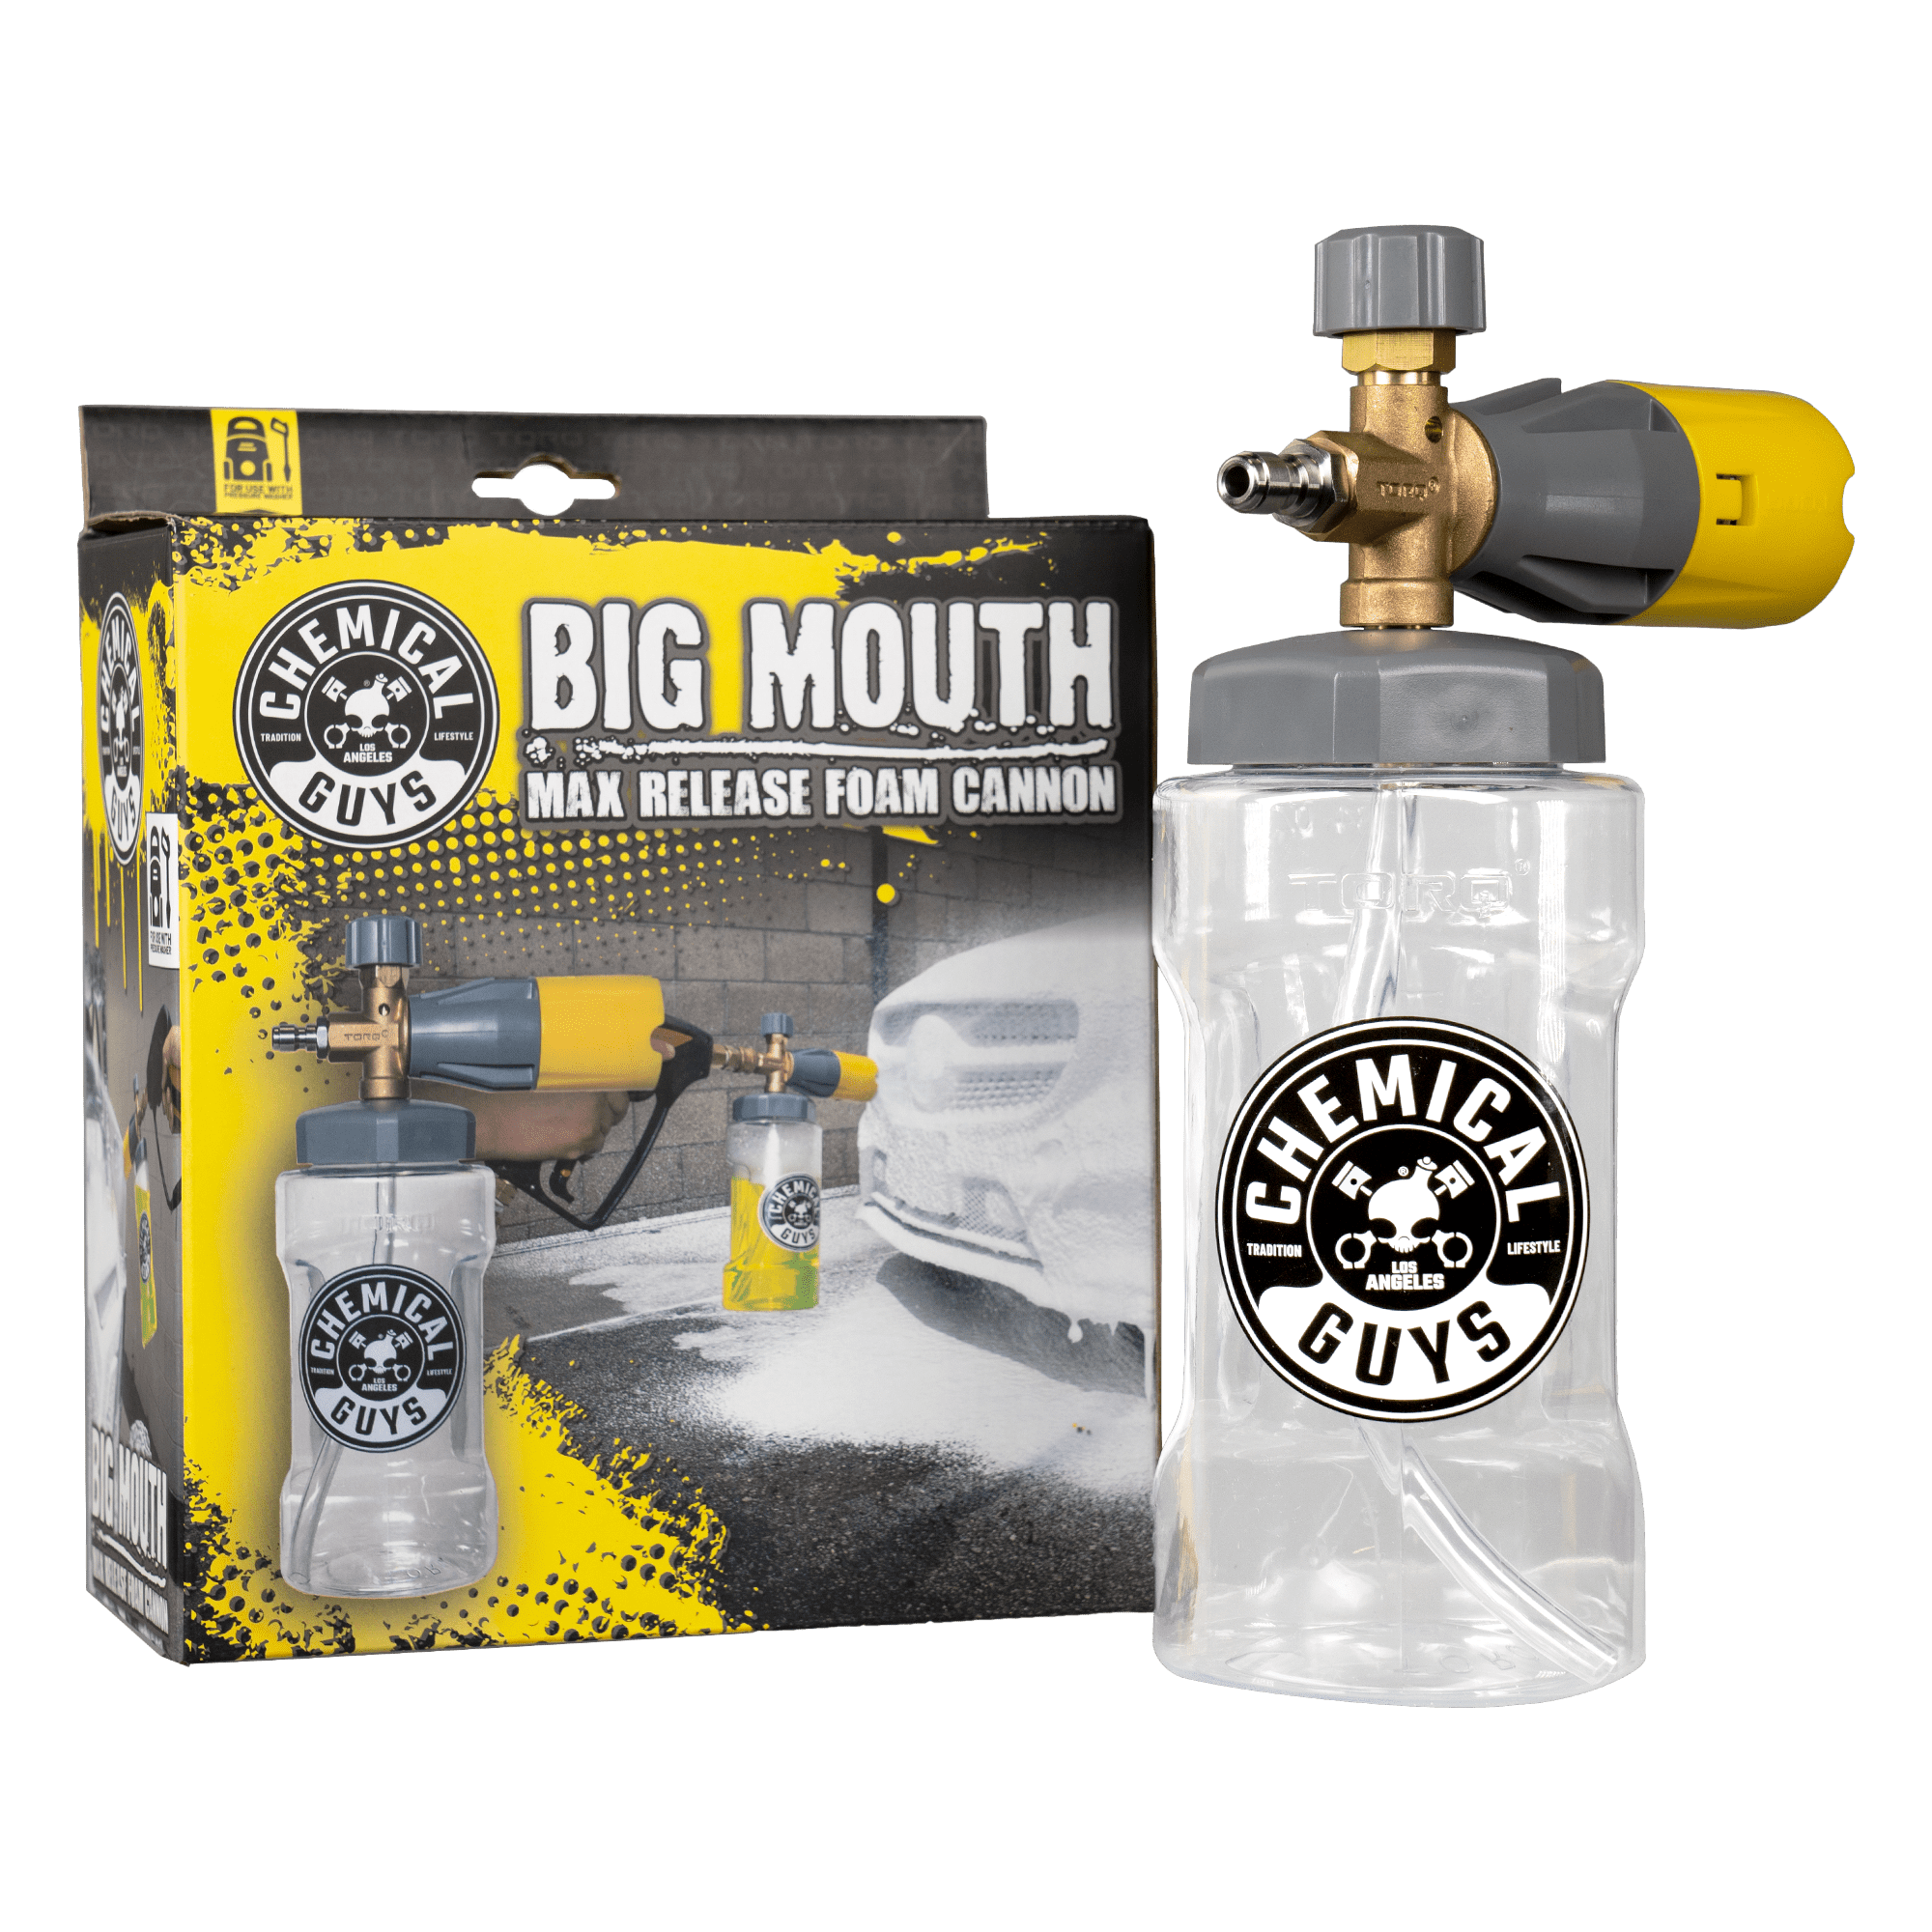 Chemical Guys Big Mouth Foam Canon, Max Release EQP324